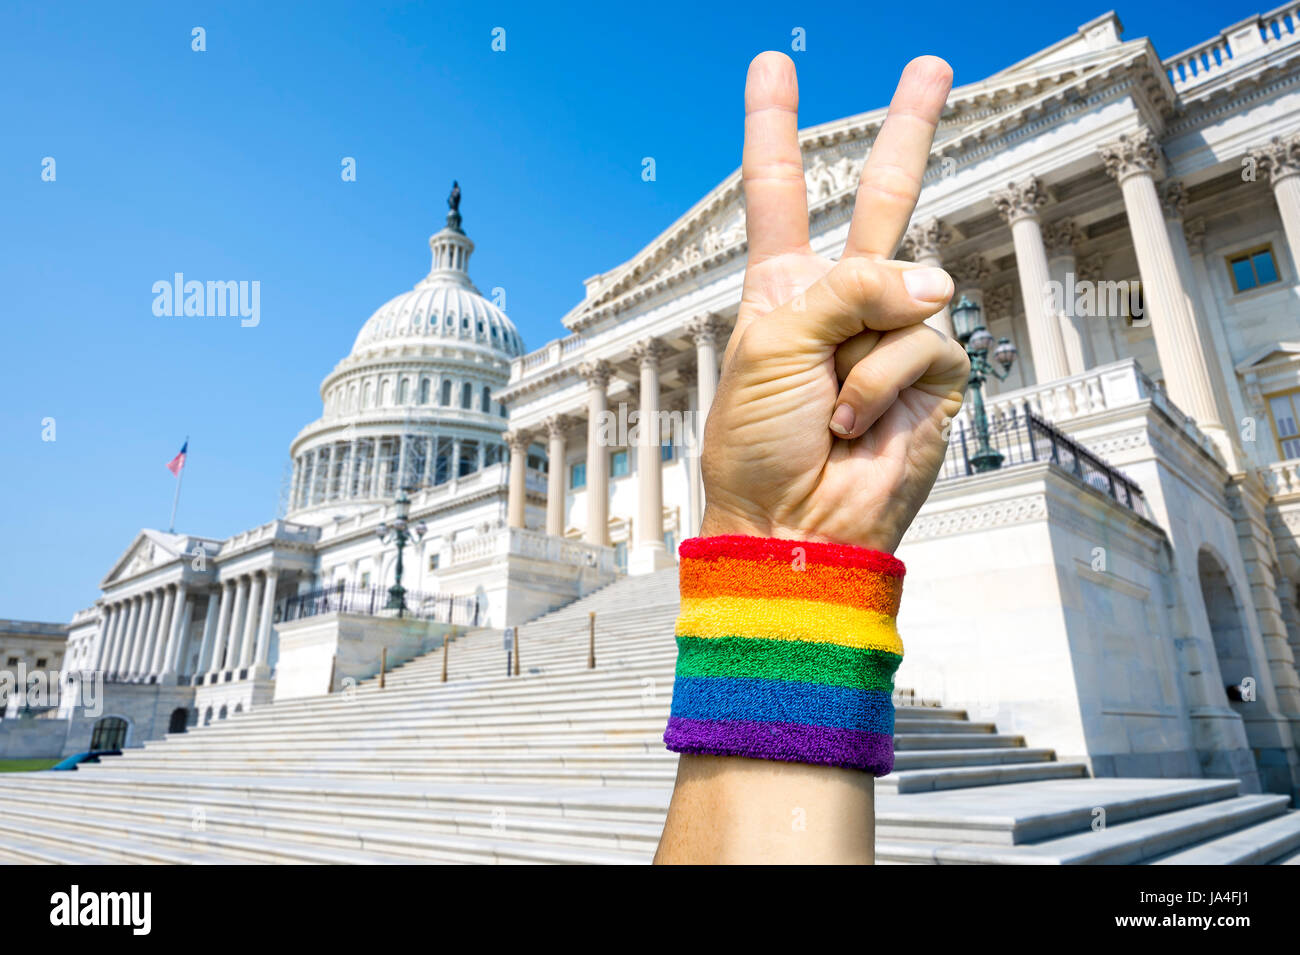 American hand wearing gay pride rainbow flag wristband holding up a peace sign gesture in front of the Capitol Building in Washington, DC, USA Stock Photo